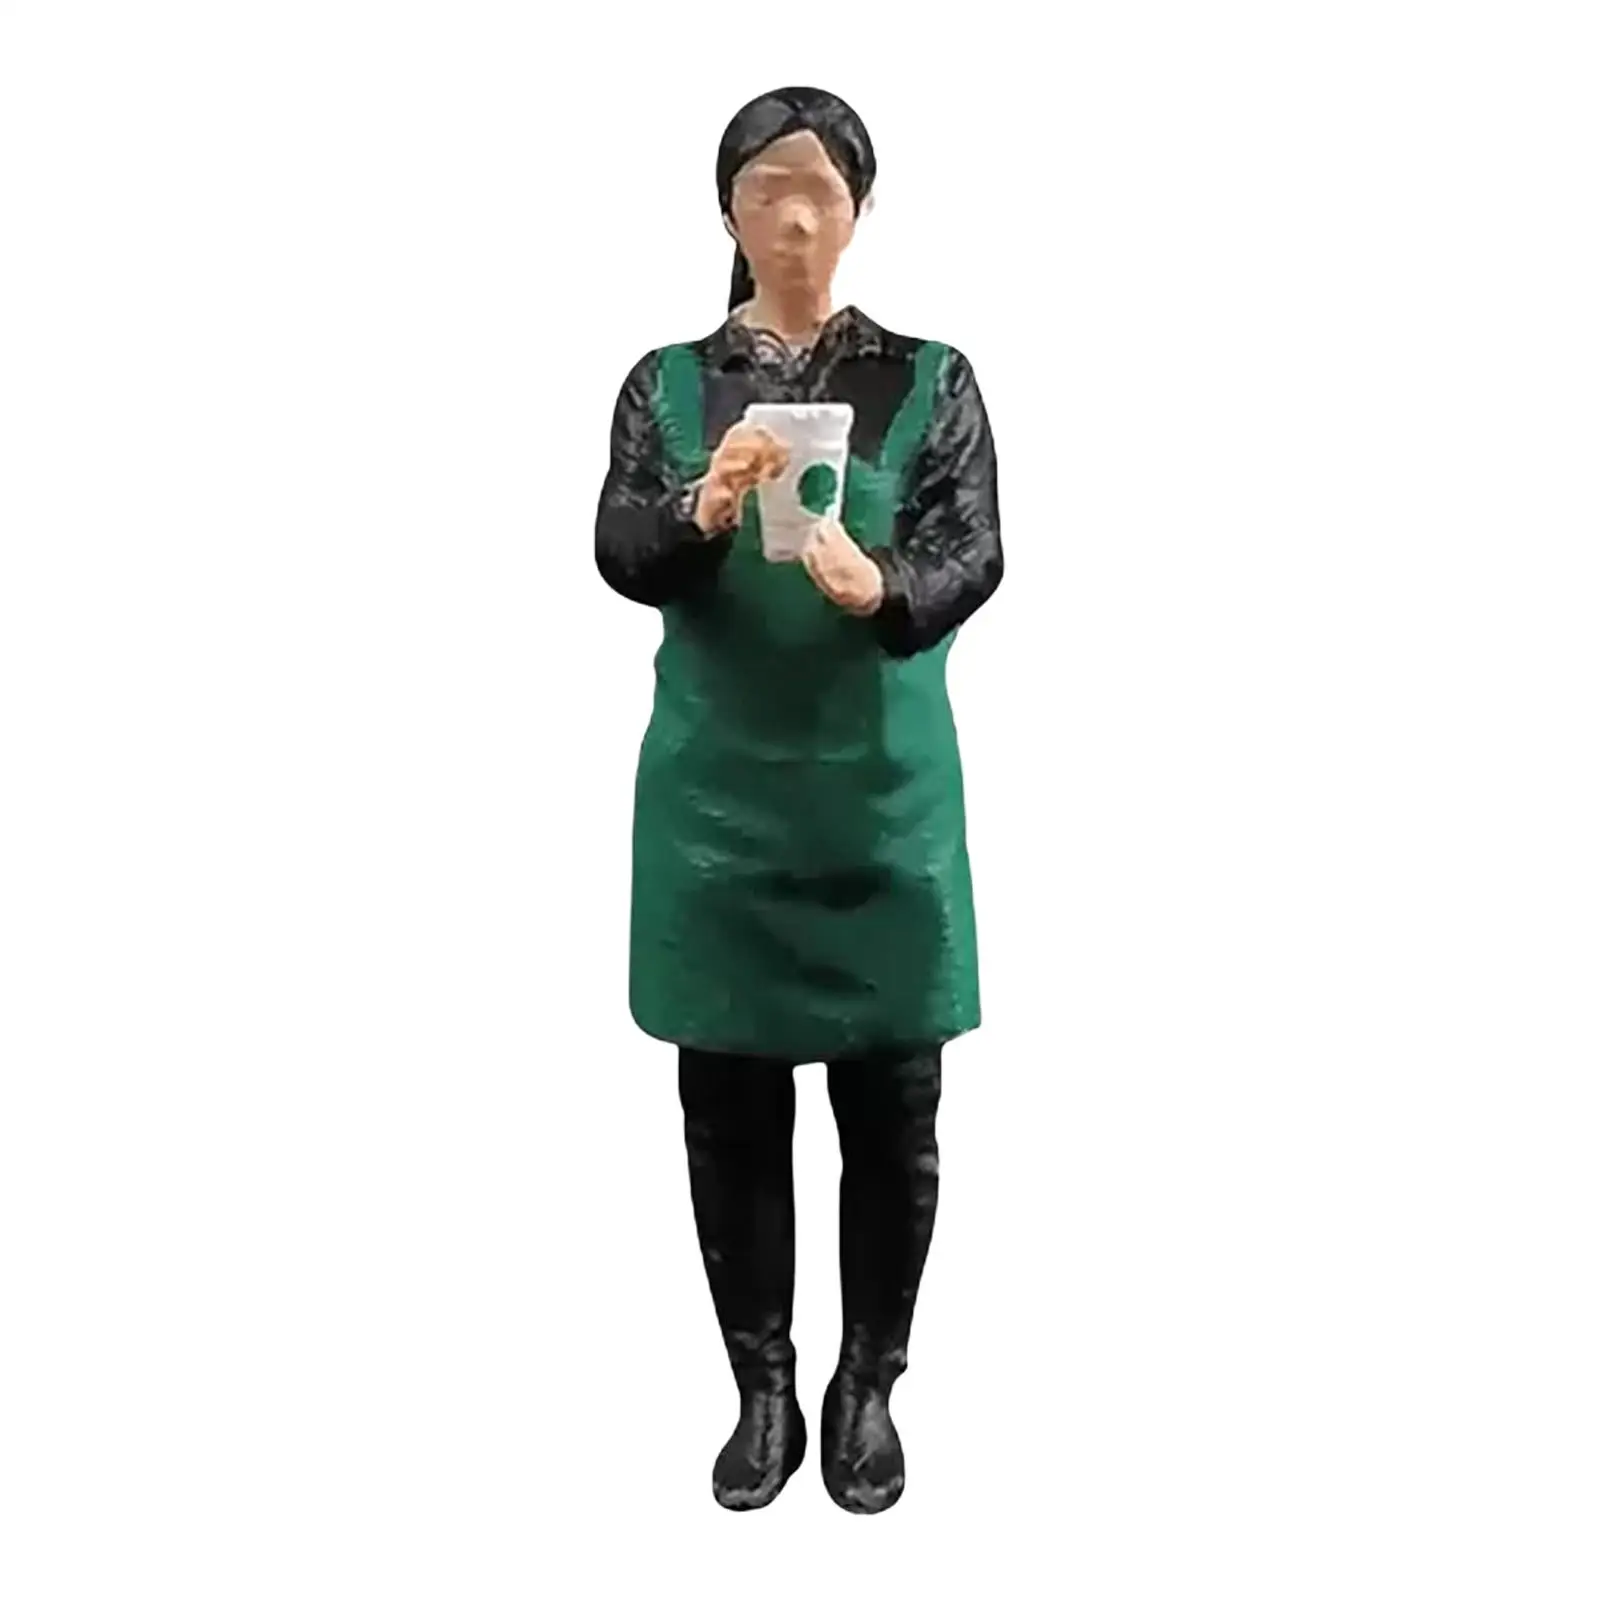 Hand Painted 1/64 Coffee Salesperson Figures Movie Props Dioramas Decoration